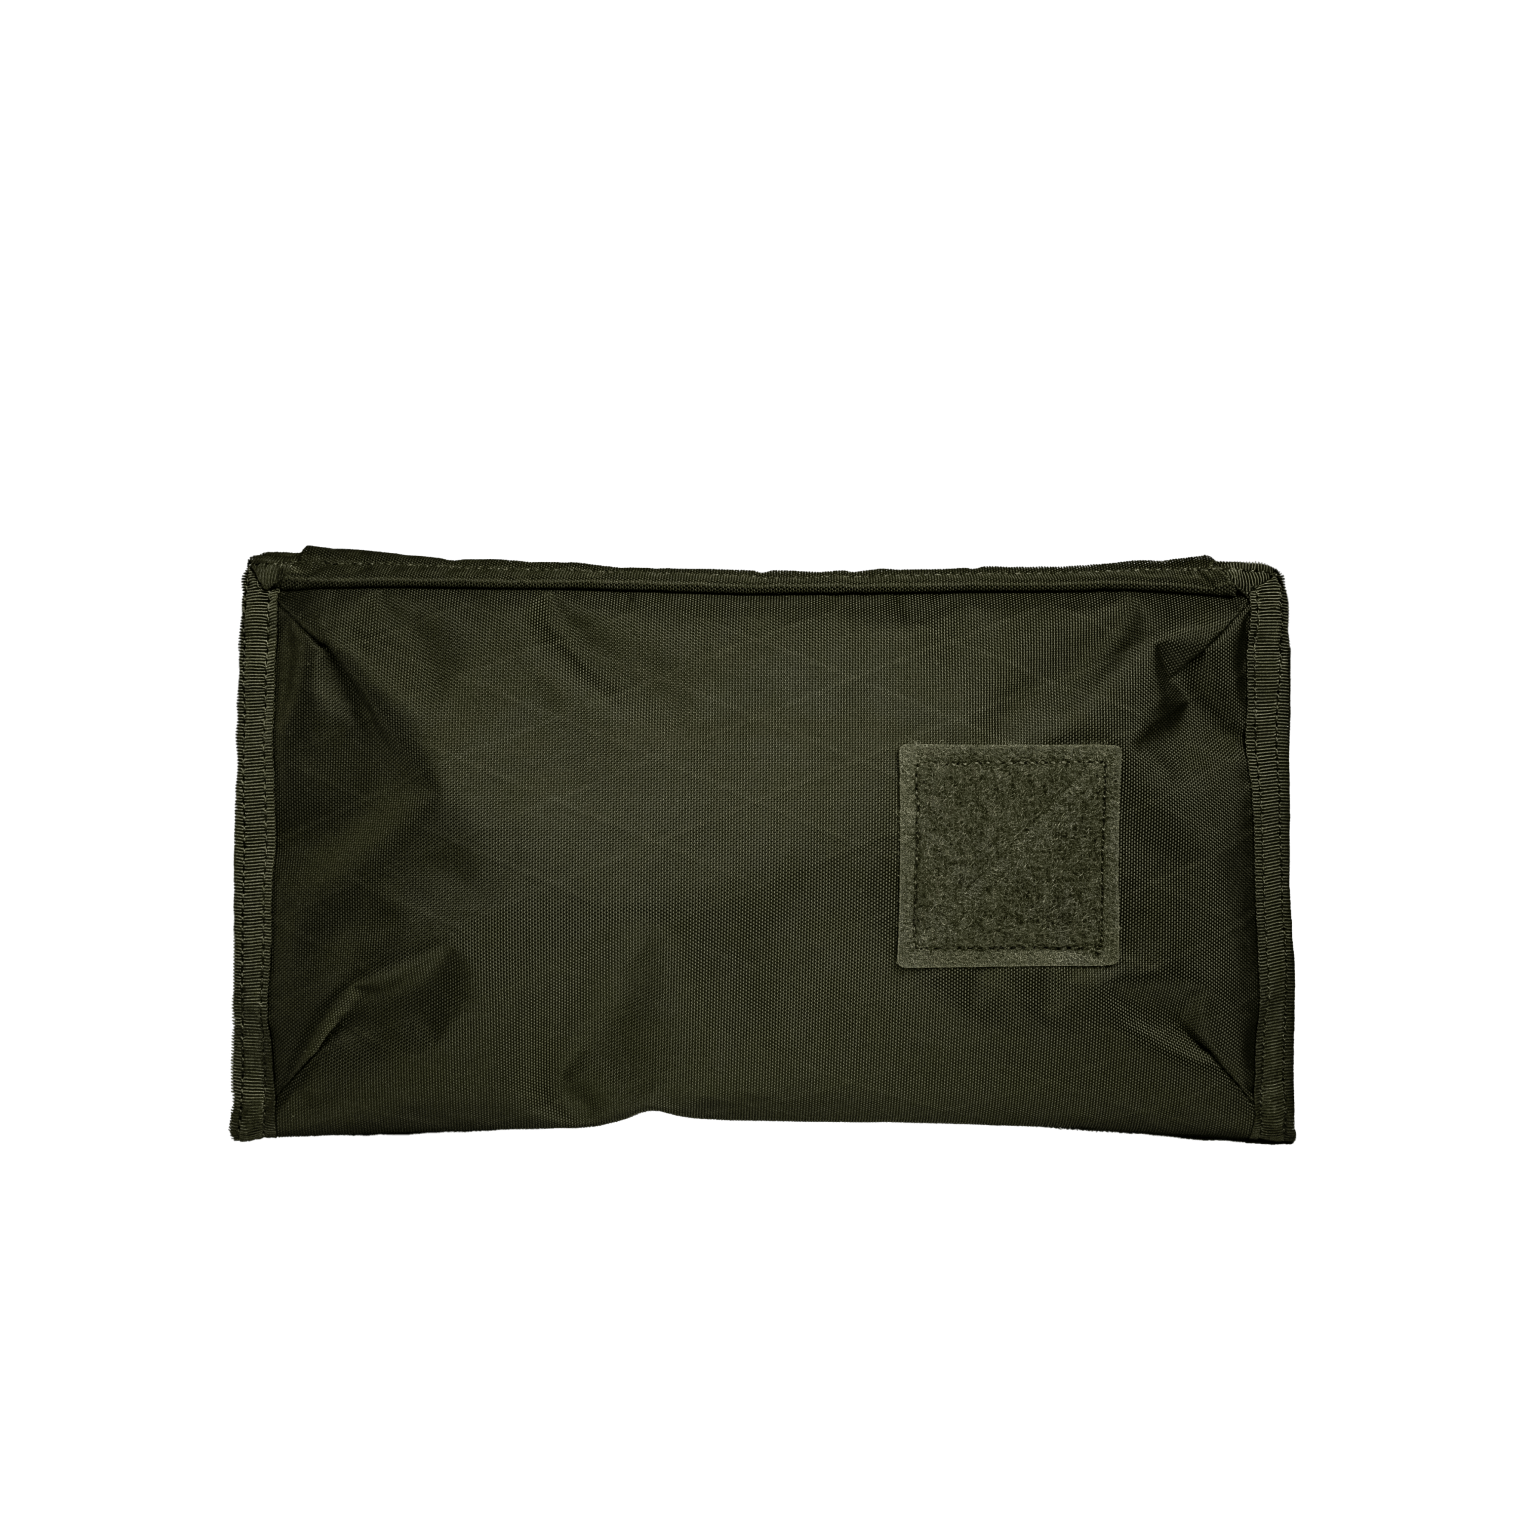 Civic Access Pouch 1L (OD Green Limited Edition)